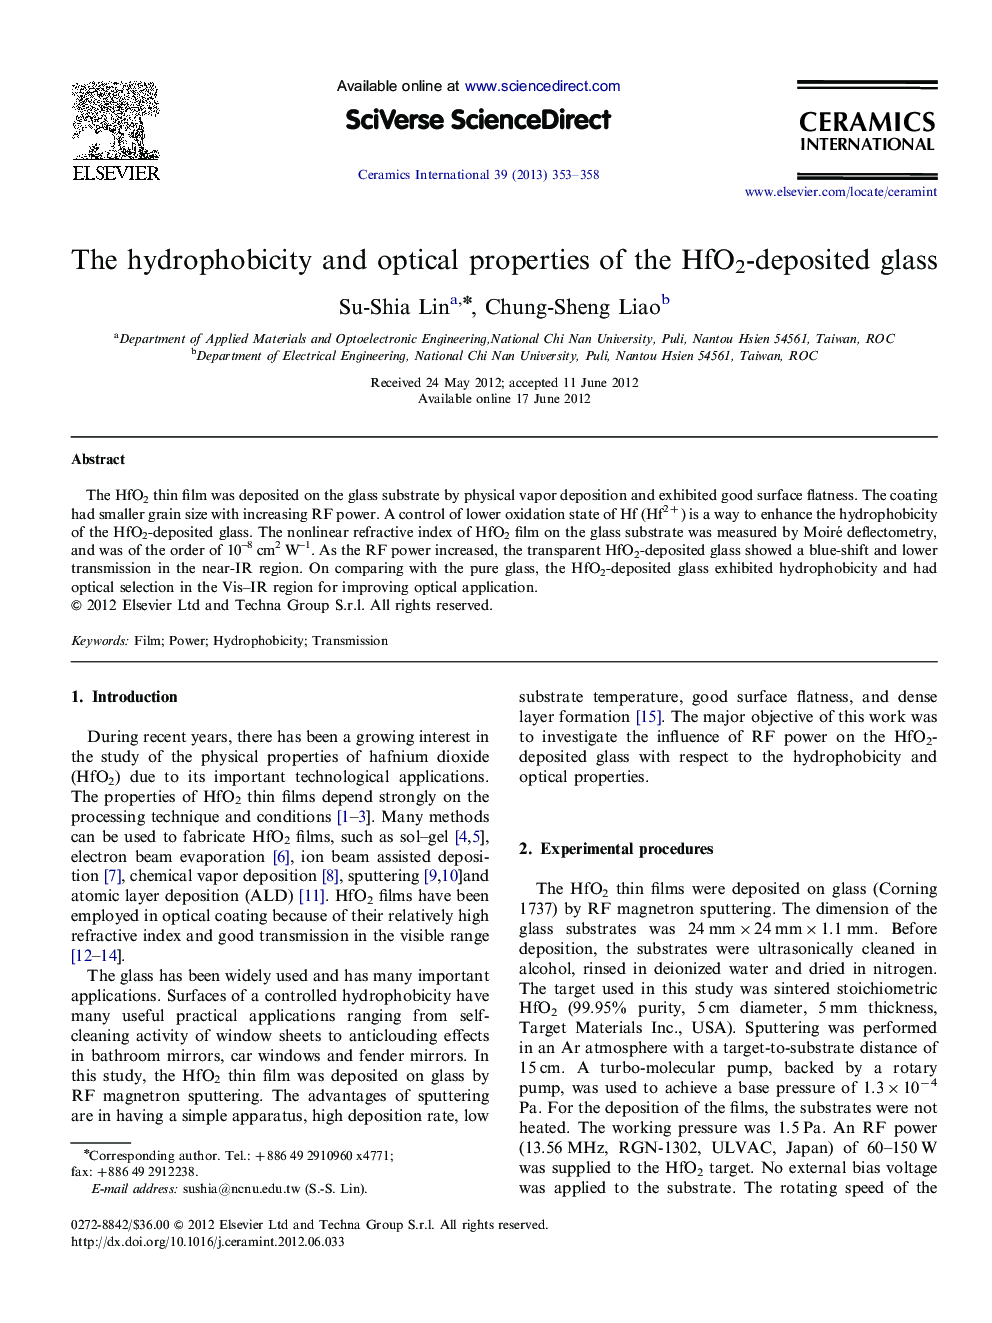 The hydrophobicity and optical properties of the HfO2-deposited glass